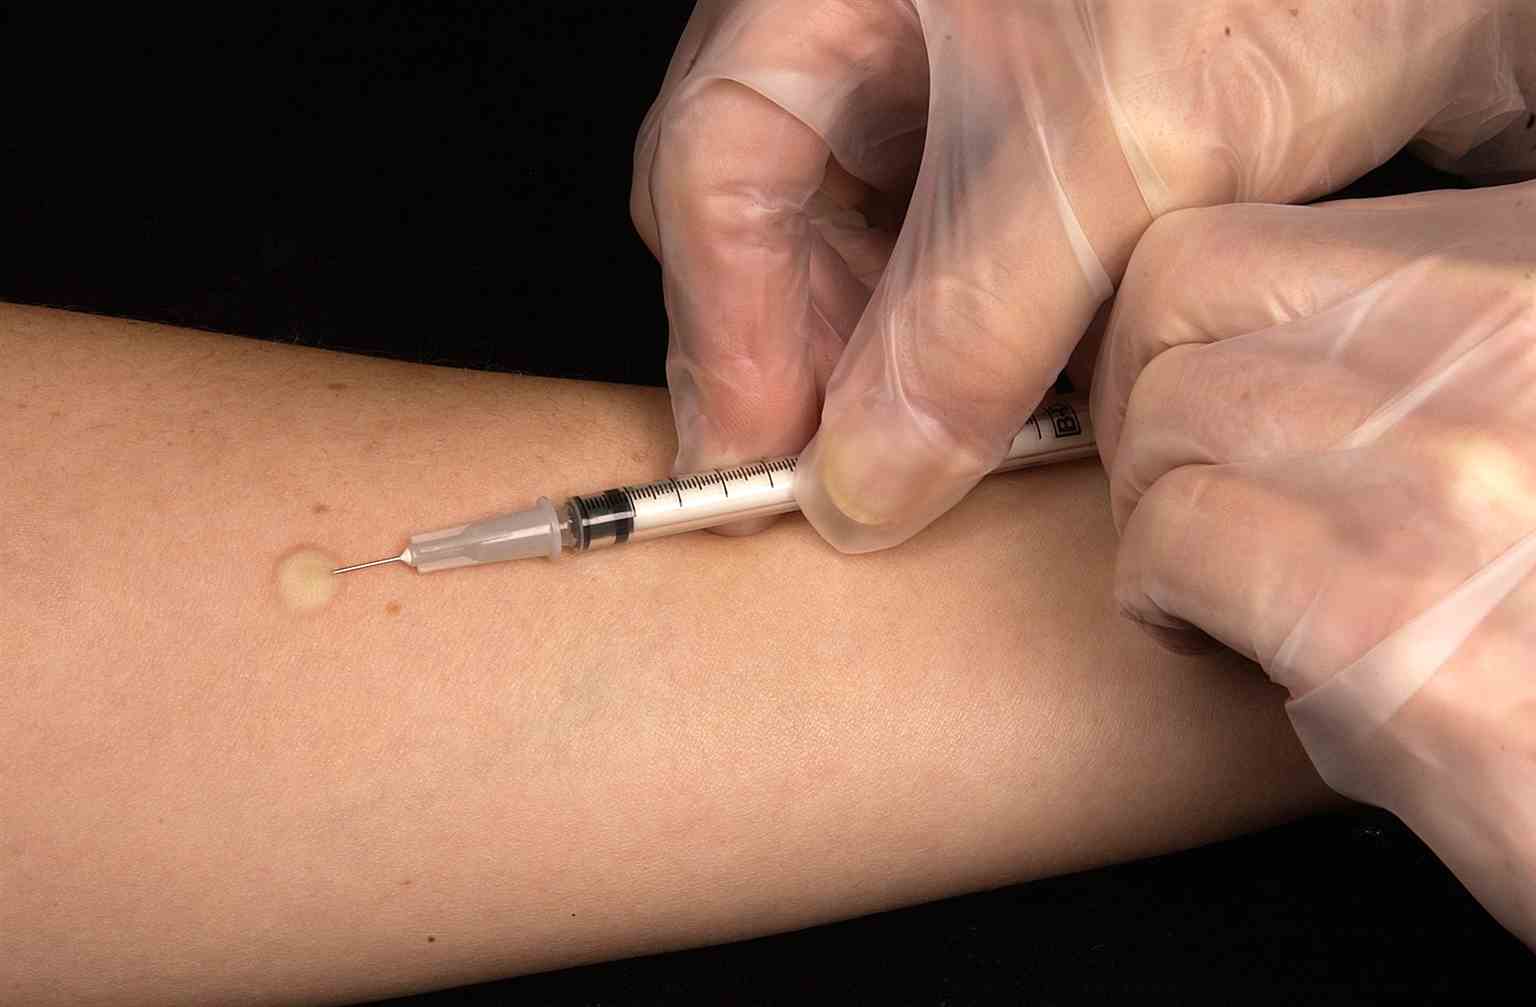 This technician is in the process of correctly placing a Mantoux tuberculin skin test in this recipient’s forearm, which will cause a 6mm to10mm wheal, i.e., a raised area of skin surface, to form at the injection site. The Mantoux tuberculin skin test is used to evaluate people for latent tuberculosis (TB) infection. In the United States, this skin test consists of an intradermal injection of exactly one tenth of a milliliter (mL) of tuberculin, which contains five tuberculin units. Correct placement of this intradermal injection involves inserting the needle bevel slowly at a 5° to 15° angle. The needle bevel is advanced through the epidermis, the superficial layer of skin, approximately 3mm so that the entire bevel is covered and lies just under the skin surface. A tense, pale wheal that is 6mm to 10mm in diameter appears over the needle bevel.